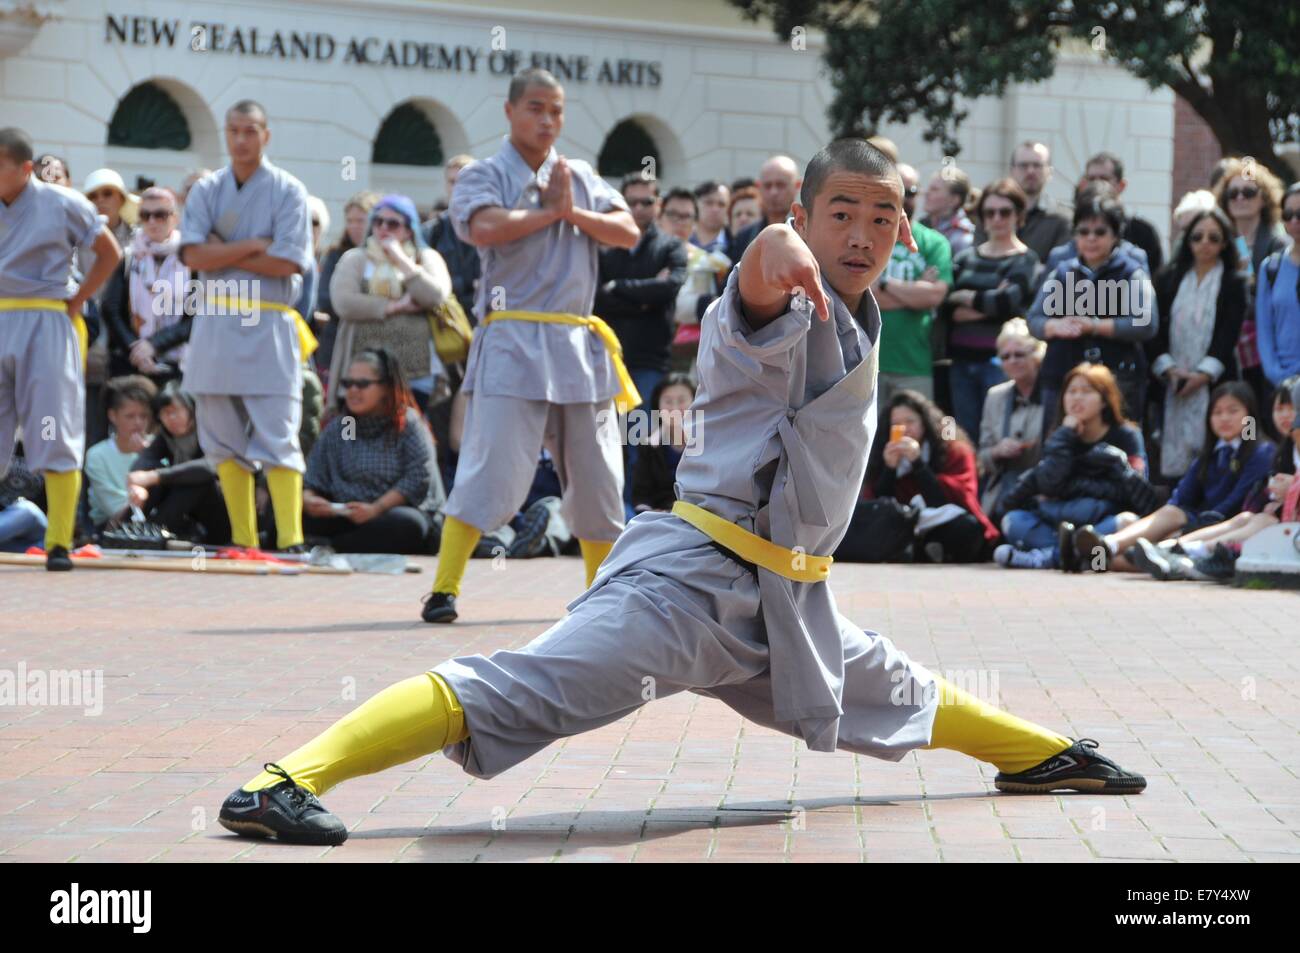 (140926) -- WELLINGTON, Sept. 26, 2014 (Xinhua) -- Chinese Kungfu monks perform in Wellington, New Zealand, Spet. 26, 2014. The iconic Shaolin Kungfu Monk Troupe arrived in Wellington to attend the World of Wearable (WOW) Art Awards Shows. (Xinhua/Su Liang) Stock Photo